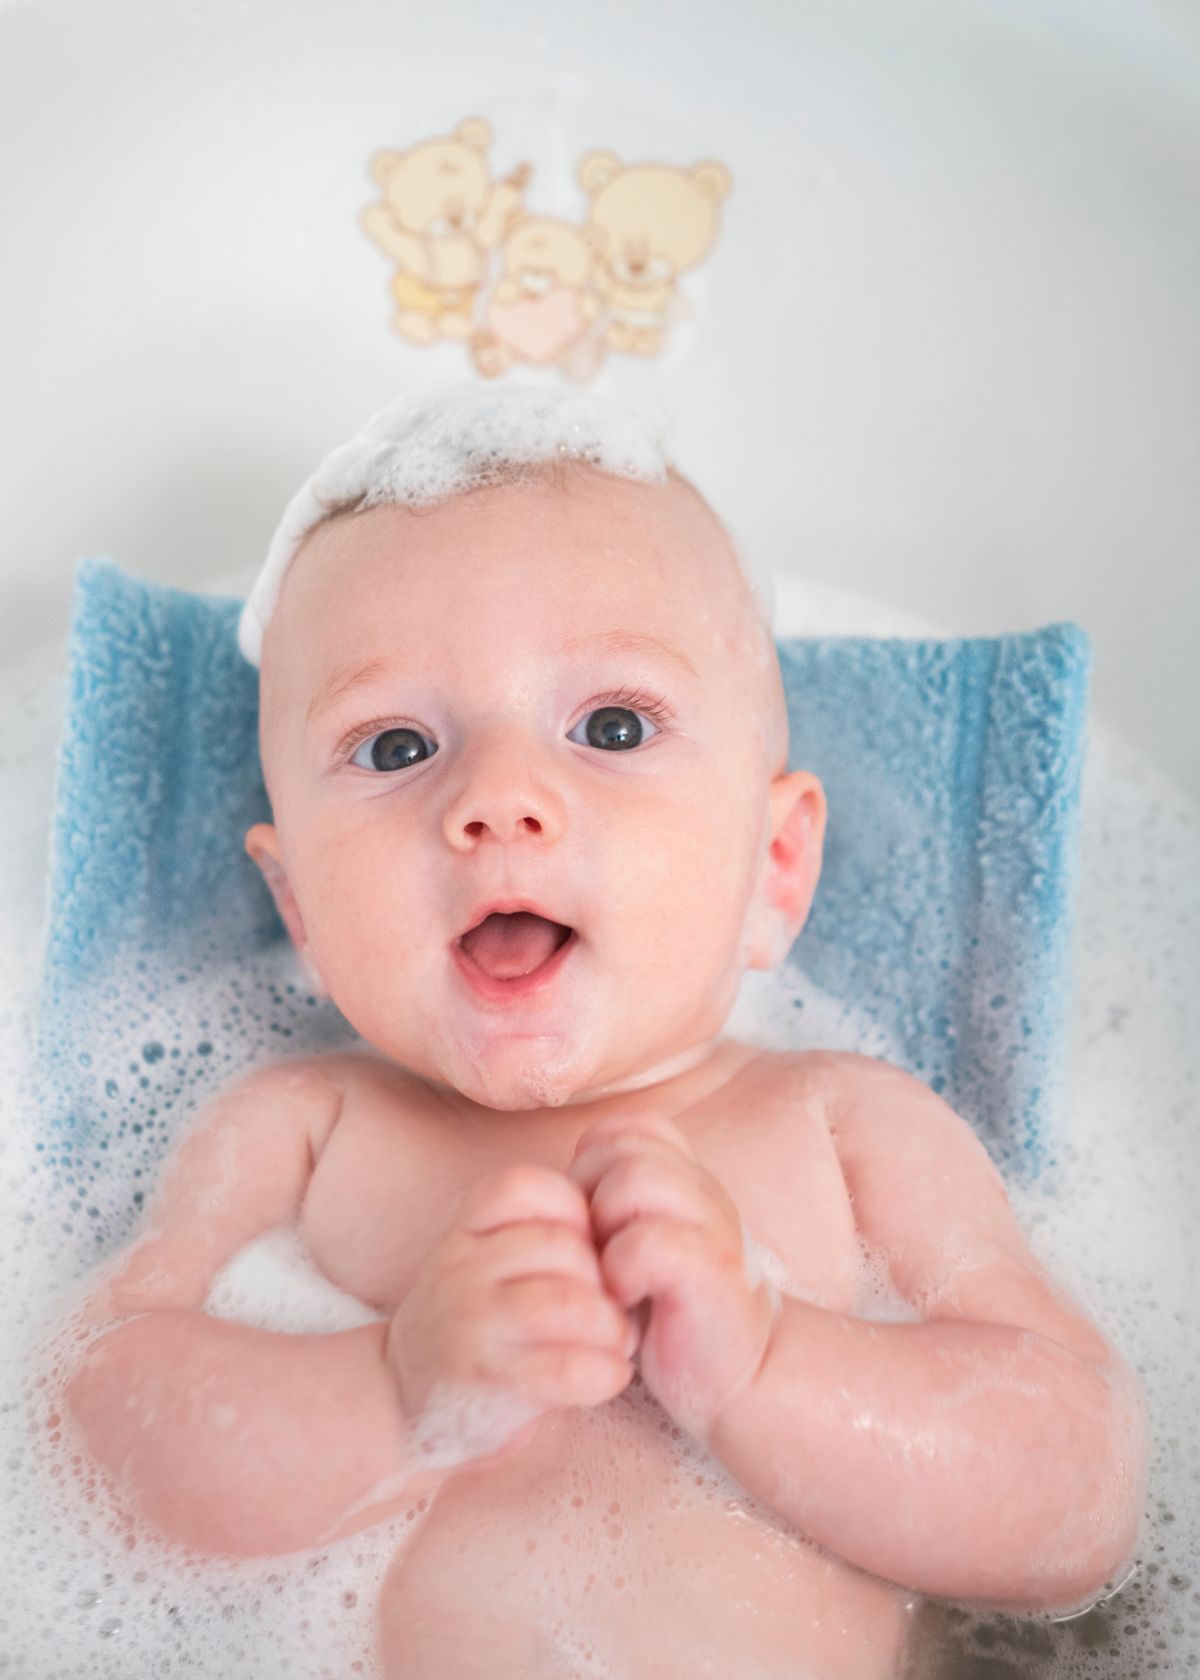 Best Body Washes for Kids